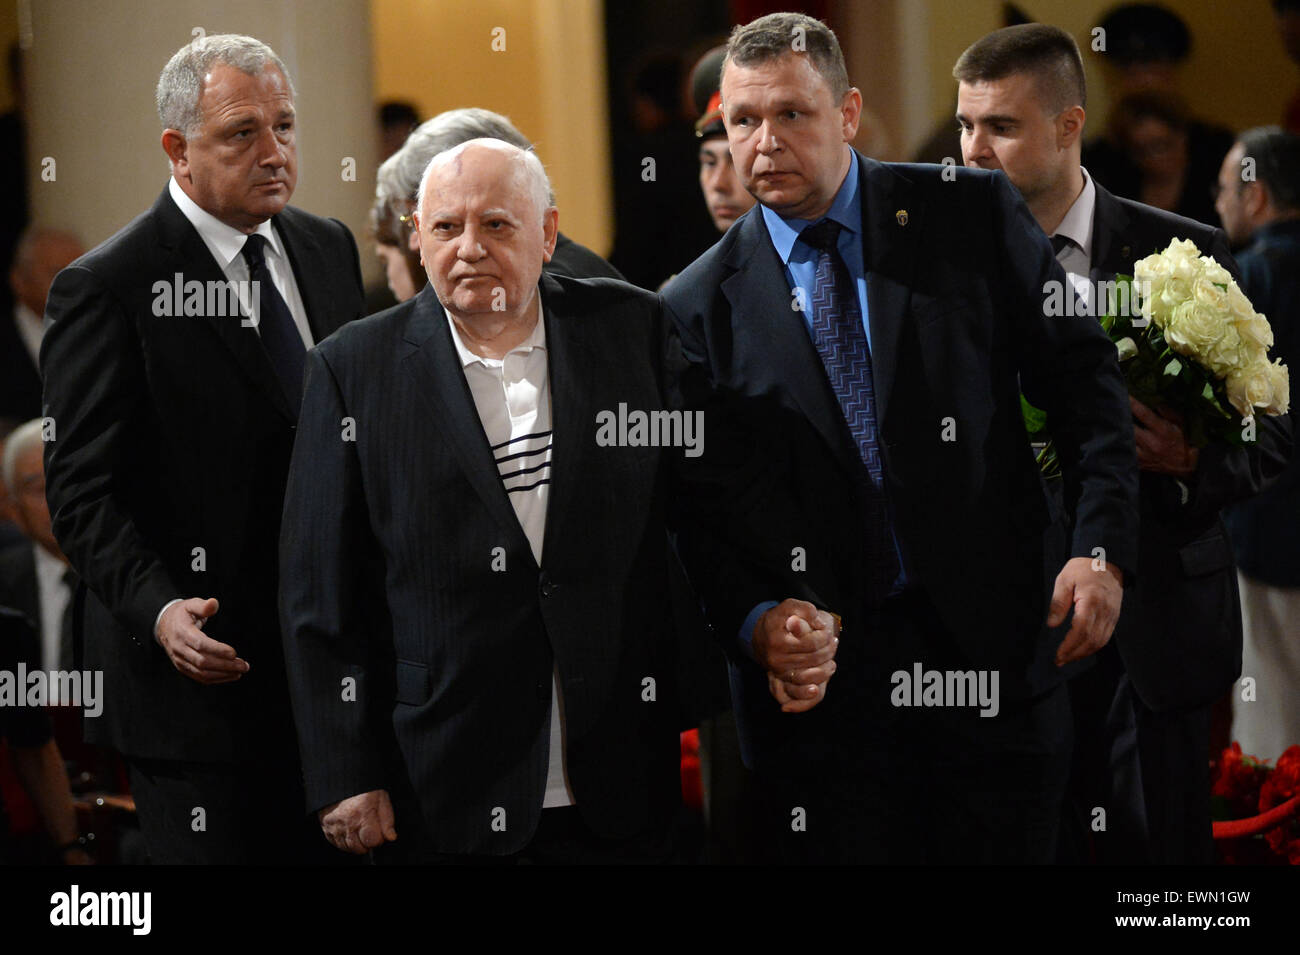 (150629) -- MOSCOW, June 29, 2015(Xinhua) -- Former Soviet Union president Mikhail Gorbachev (L front) attends the funeral ceremony of Russia's former prime minister Yevgeny Primakov in Moscow, Russia, June 29, 2015. (Xinhua/Pavel Bednyakov)(azp) Stock Photo